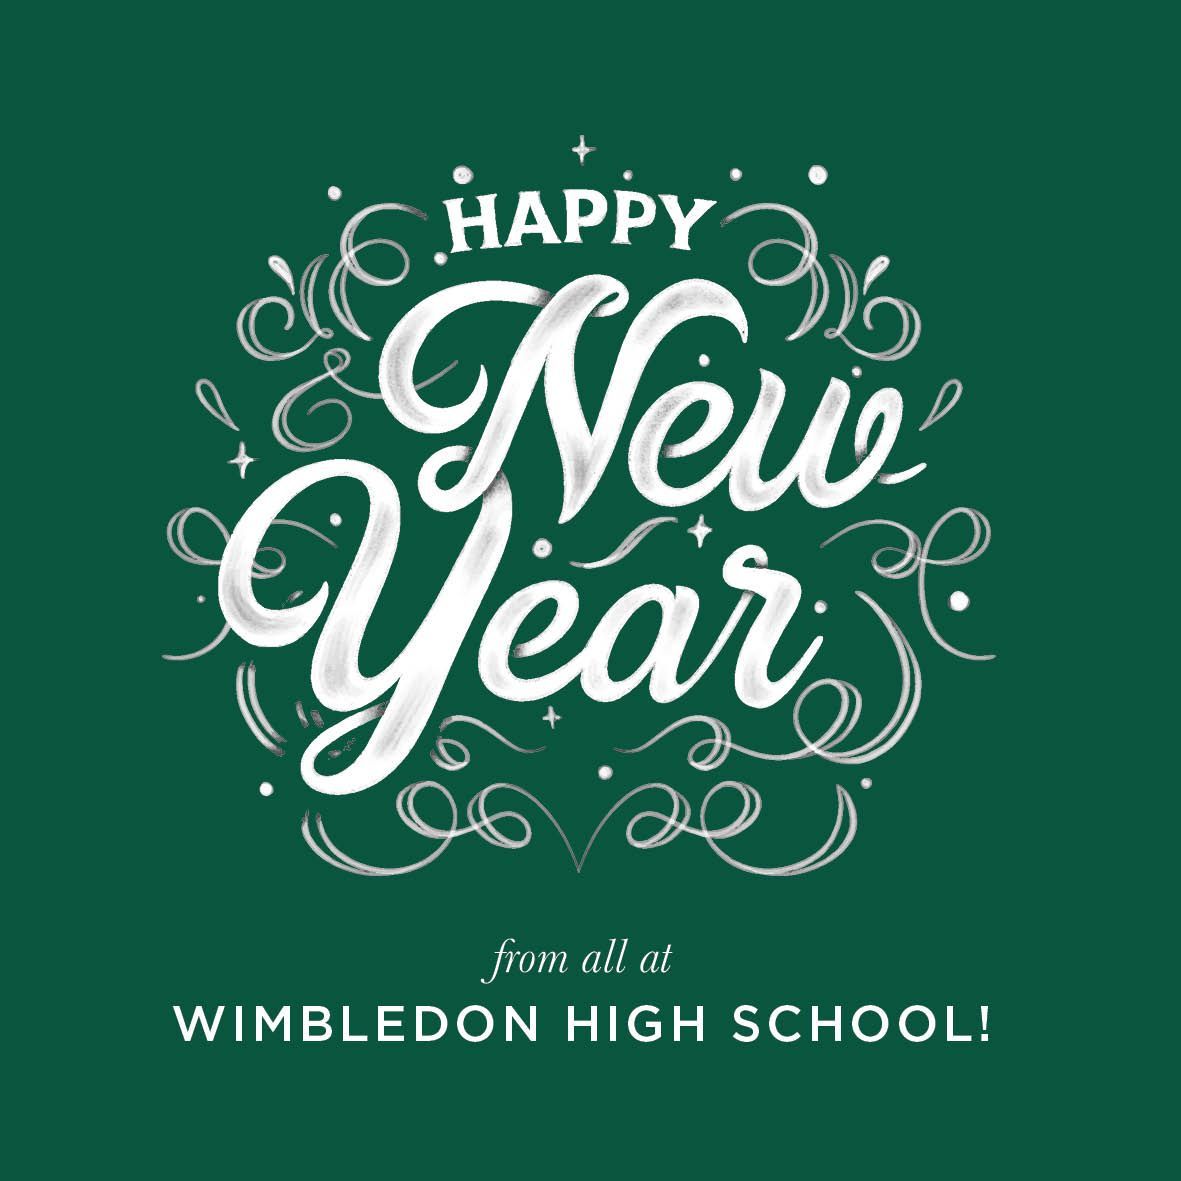 Wishing everyone a peaceful & Happy New Year. Here’s to more of what makes WHS special: “These golden threads run through our school: sisterhood, a shared sense of the responsibility we have for each other, & commitment to doing & being our best, as often as we can…” @Head_WHS